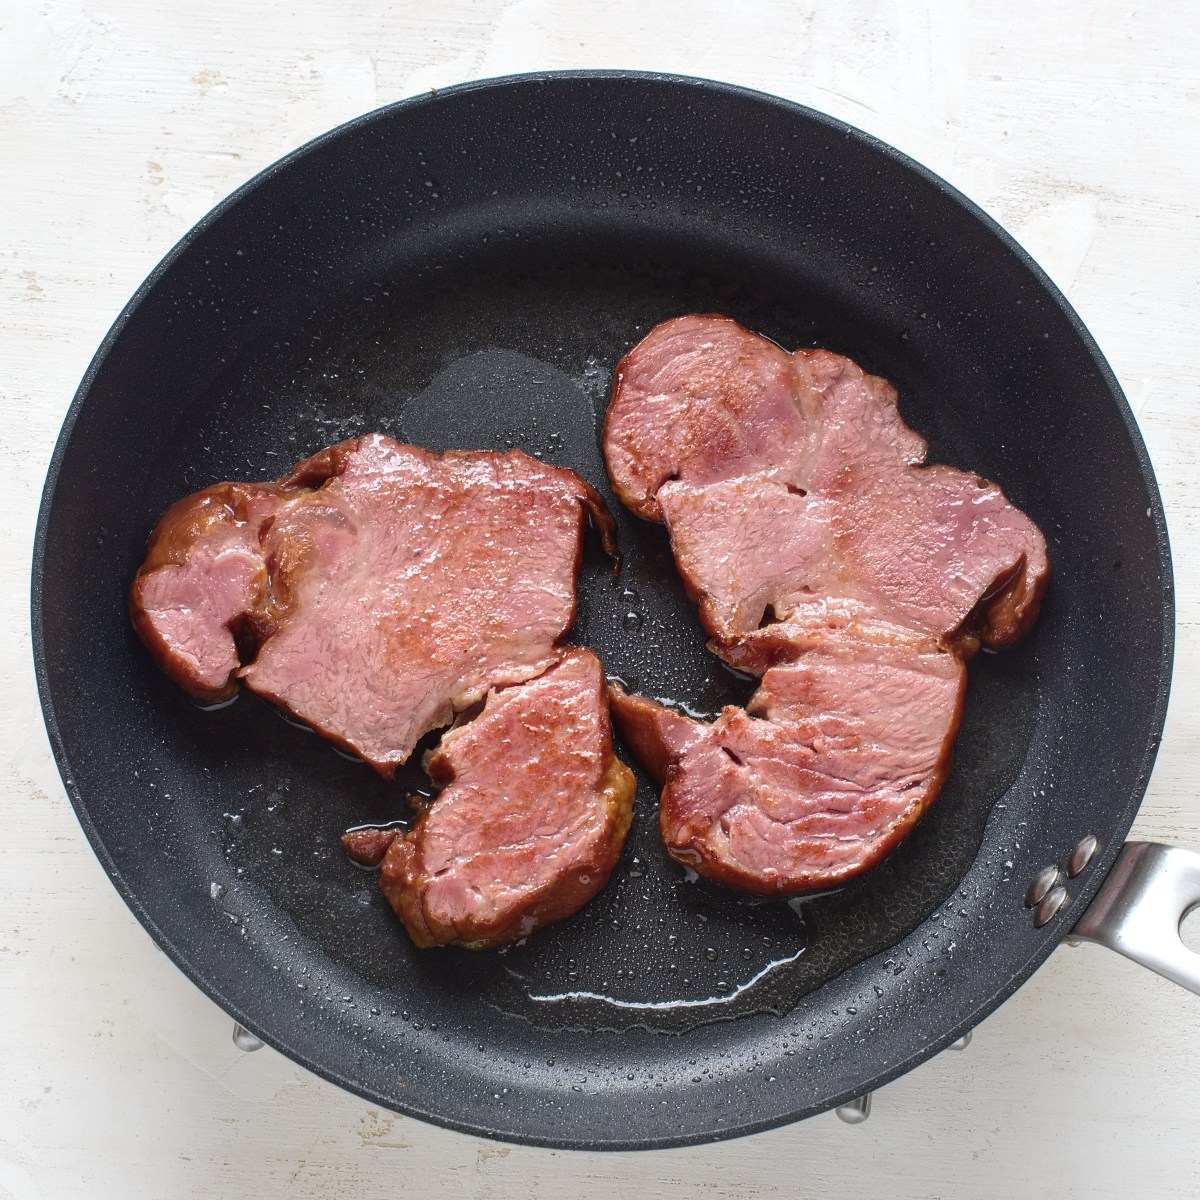 Heating smoked pork in a pan.